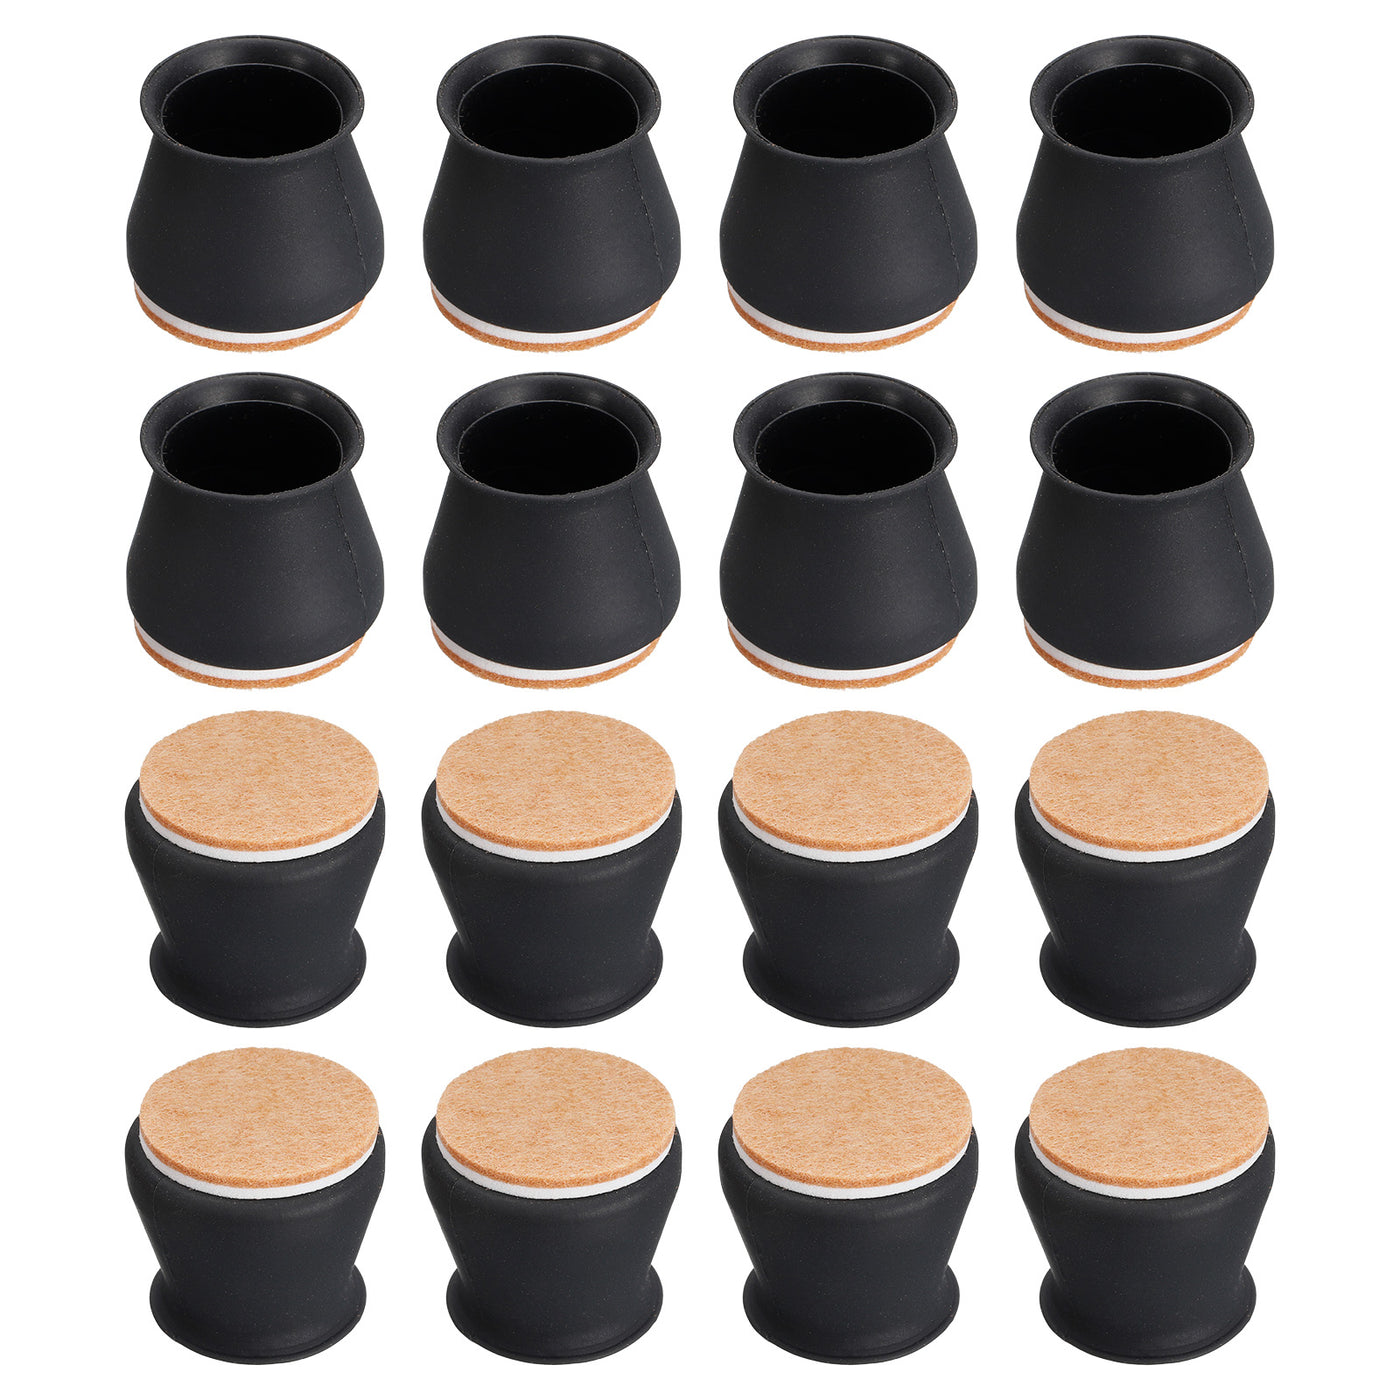 uxcell Uxcell Chair Leg Floor Protectors, 16Pcs 28mm(1.1") Silicone & Felt Chair Leg Cover Caps for Hardwood Floors (Black)